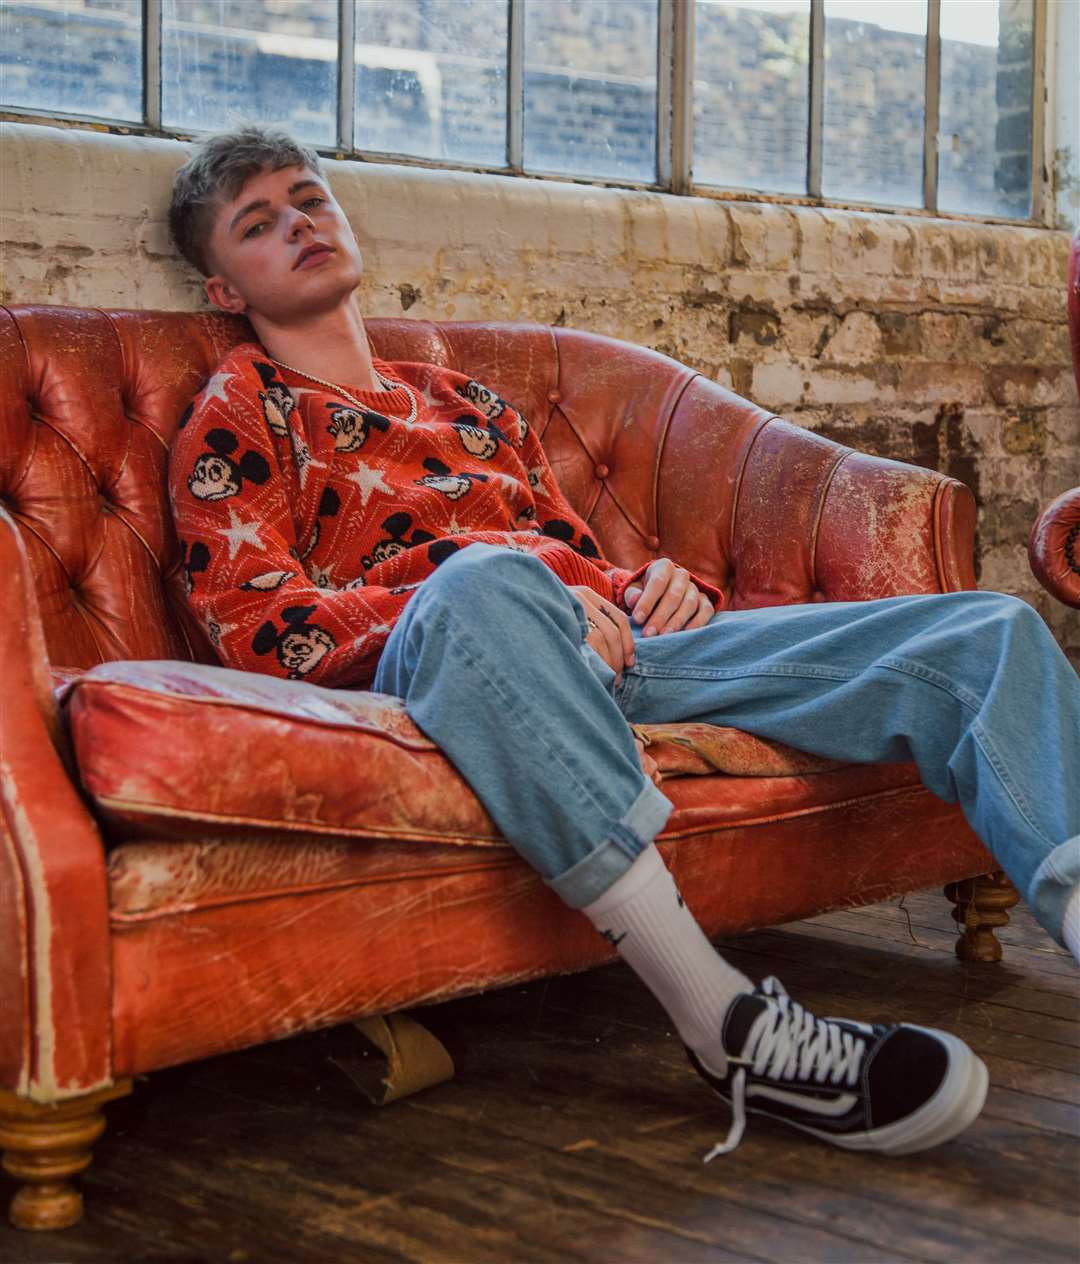 HRVY will be a special guest at Olly Murs' gig at the Hop Farm